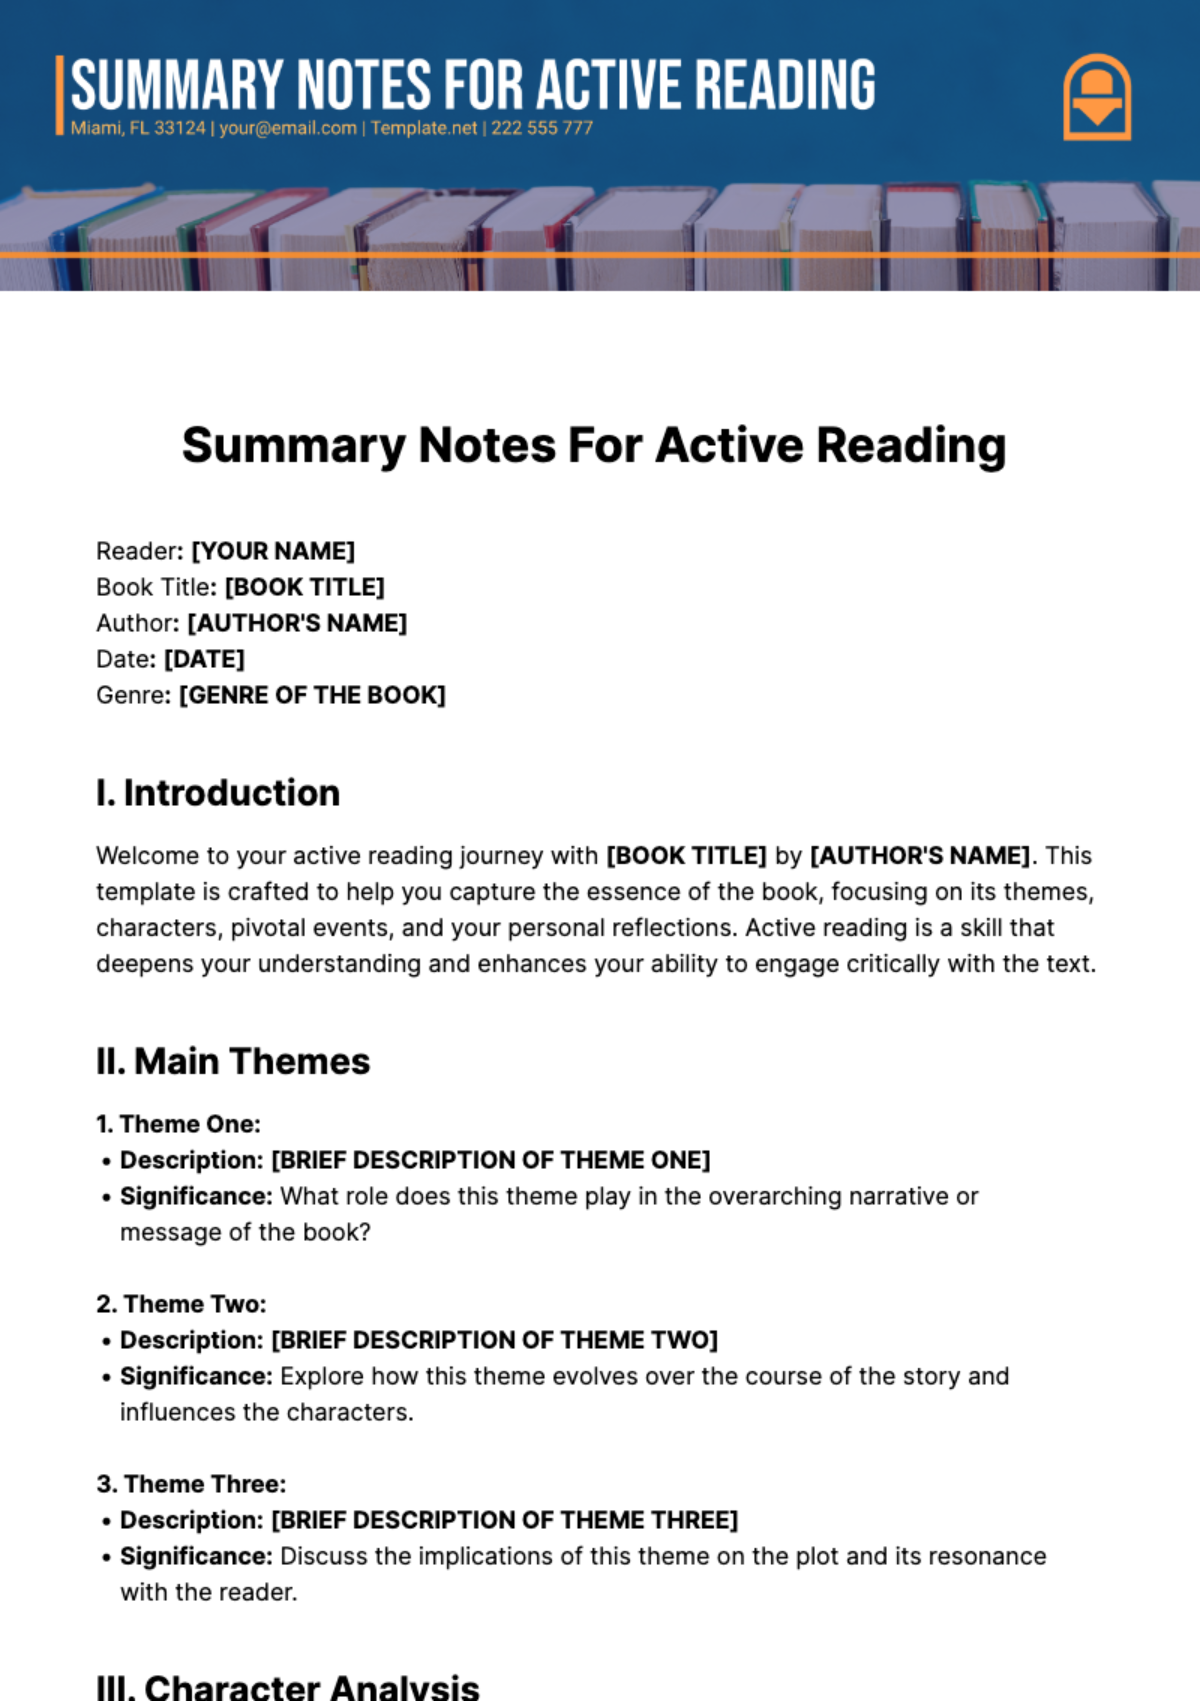 Free Summary Notes For Active Reading Template